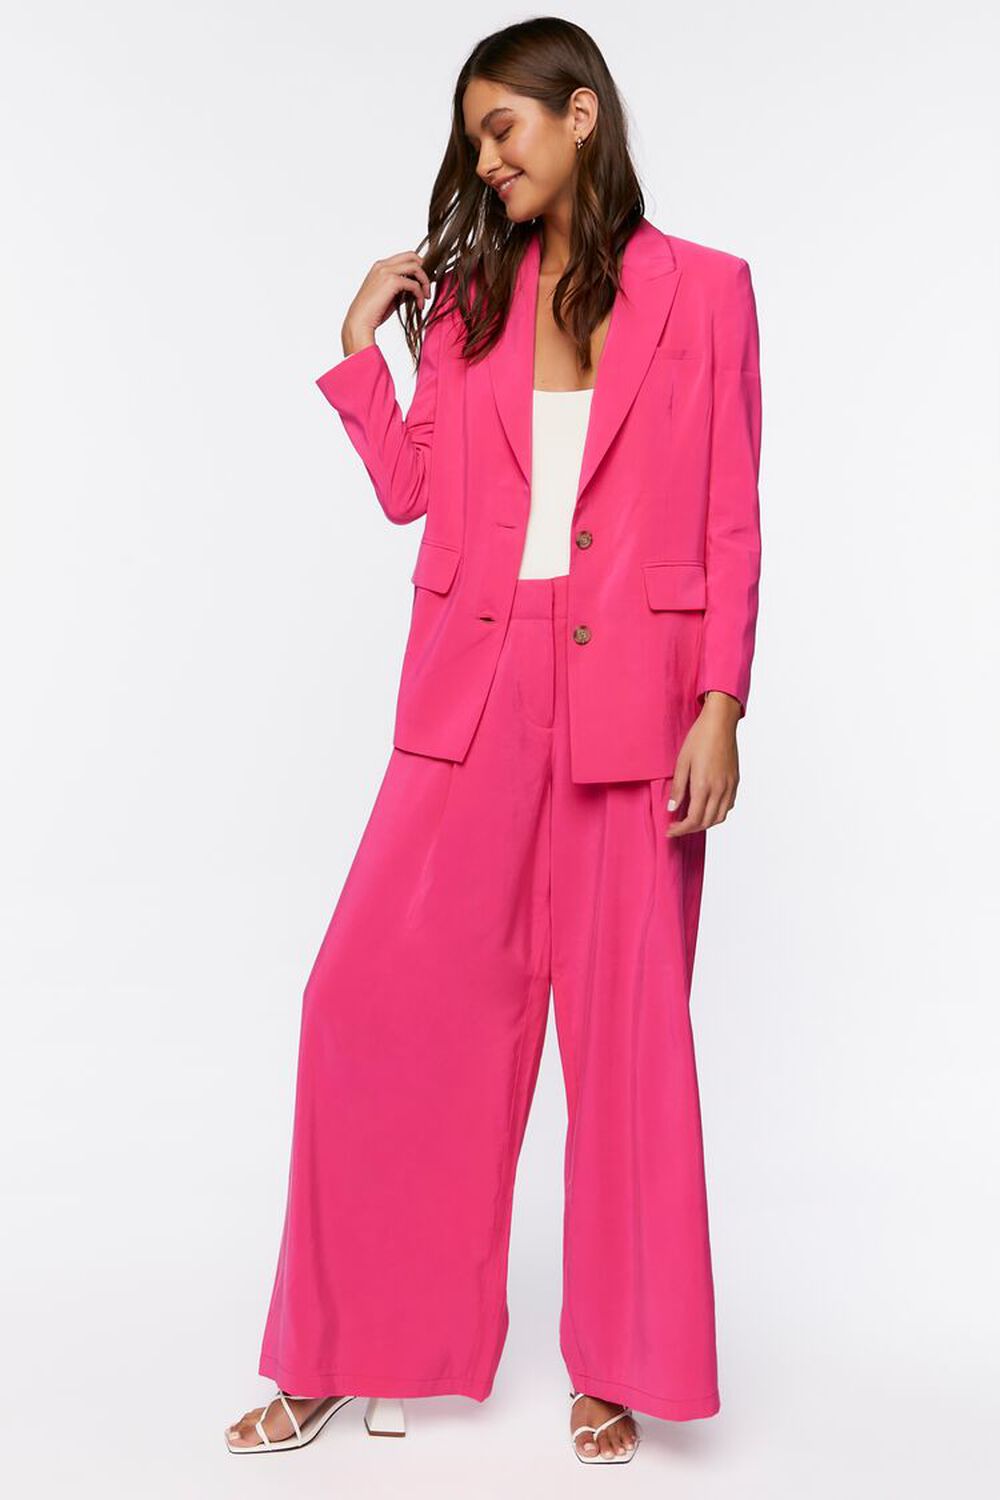 SHOCKING PINK High-Rise Wide-Leg Trousers, image 1